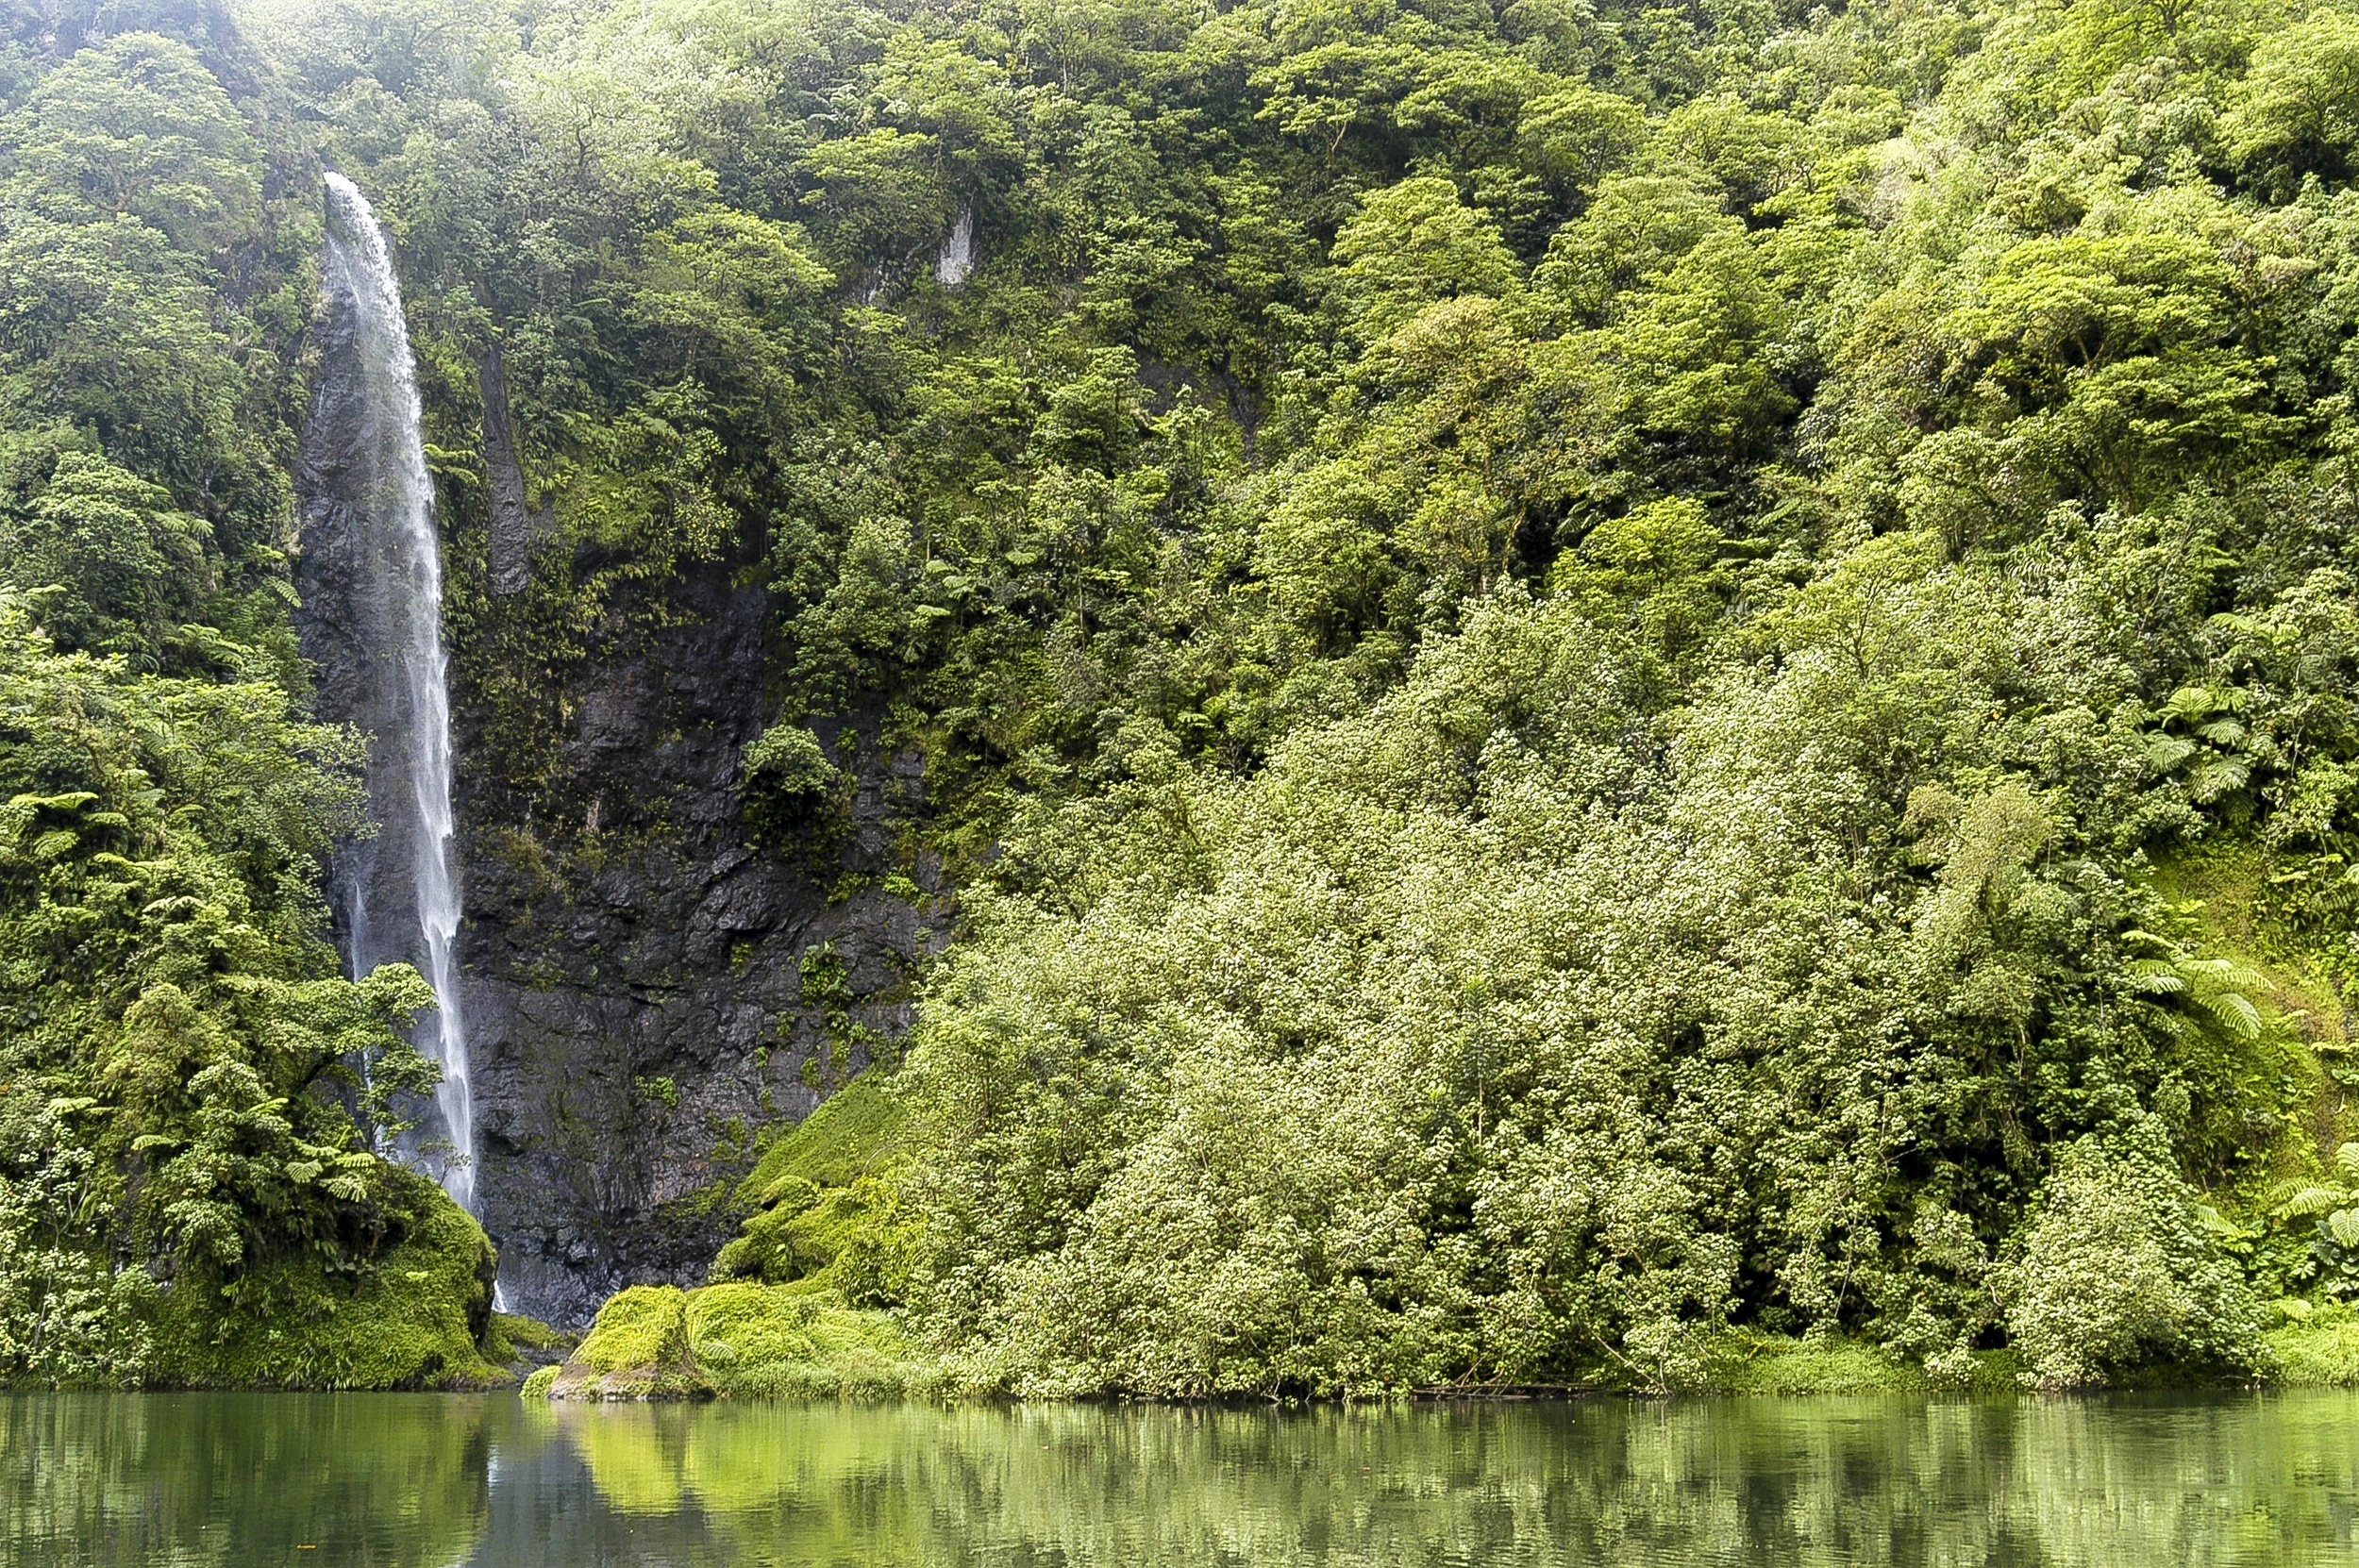 <p>Not all of Tahiti's wonders are at the beach--some of them are deep in the jungle. Fautaua is a giant waterfall that cascades into a 450-foot pool. The hike there is arduous, but you can take an ATV tour if you're up for a different kind of adventure.</p><p><a href='https://www.msn.com/en-us/community/channel/vid-cj9pqbr0vn9in2b6ddcd8sfgpfq6x6utp44fssrv6mc2gtybw0us'>Follow us on MSN to see more of our exclusive lifestyle content.</a></p>